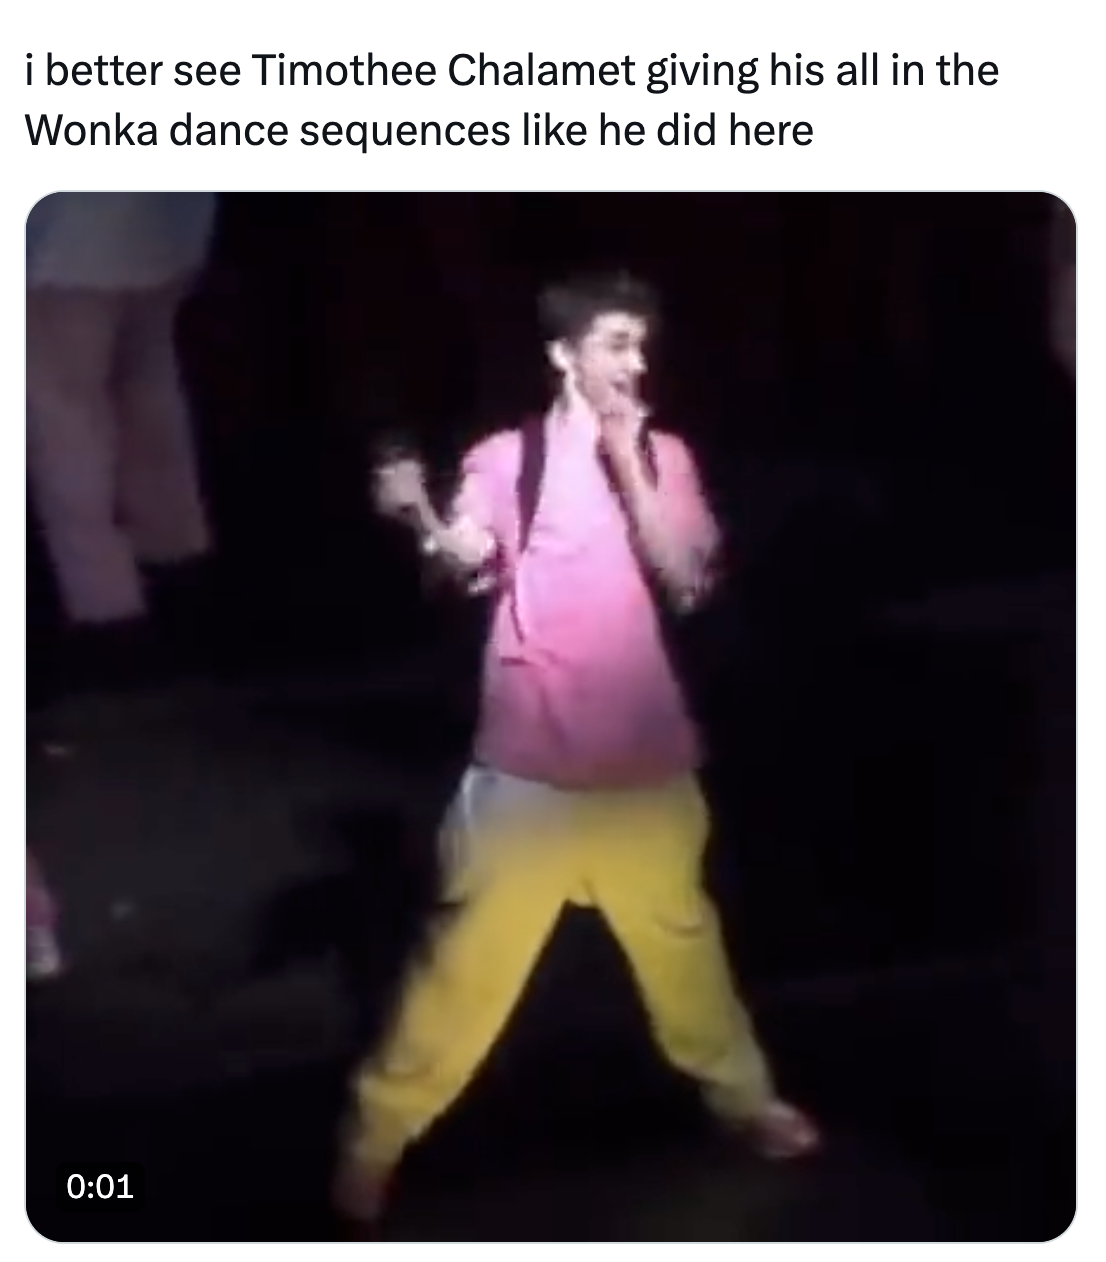 wonka memes - tristan thompson meme - i better see Timothee Chalamet giving his all in the Wonka dance sequences he did here